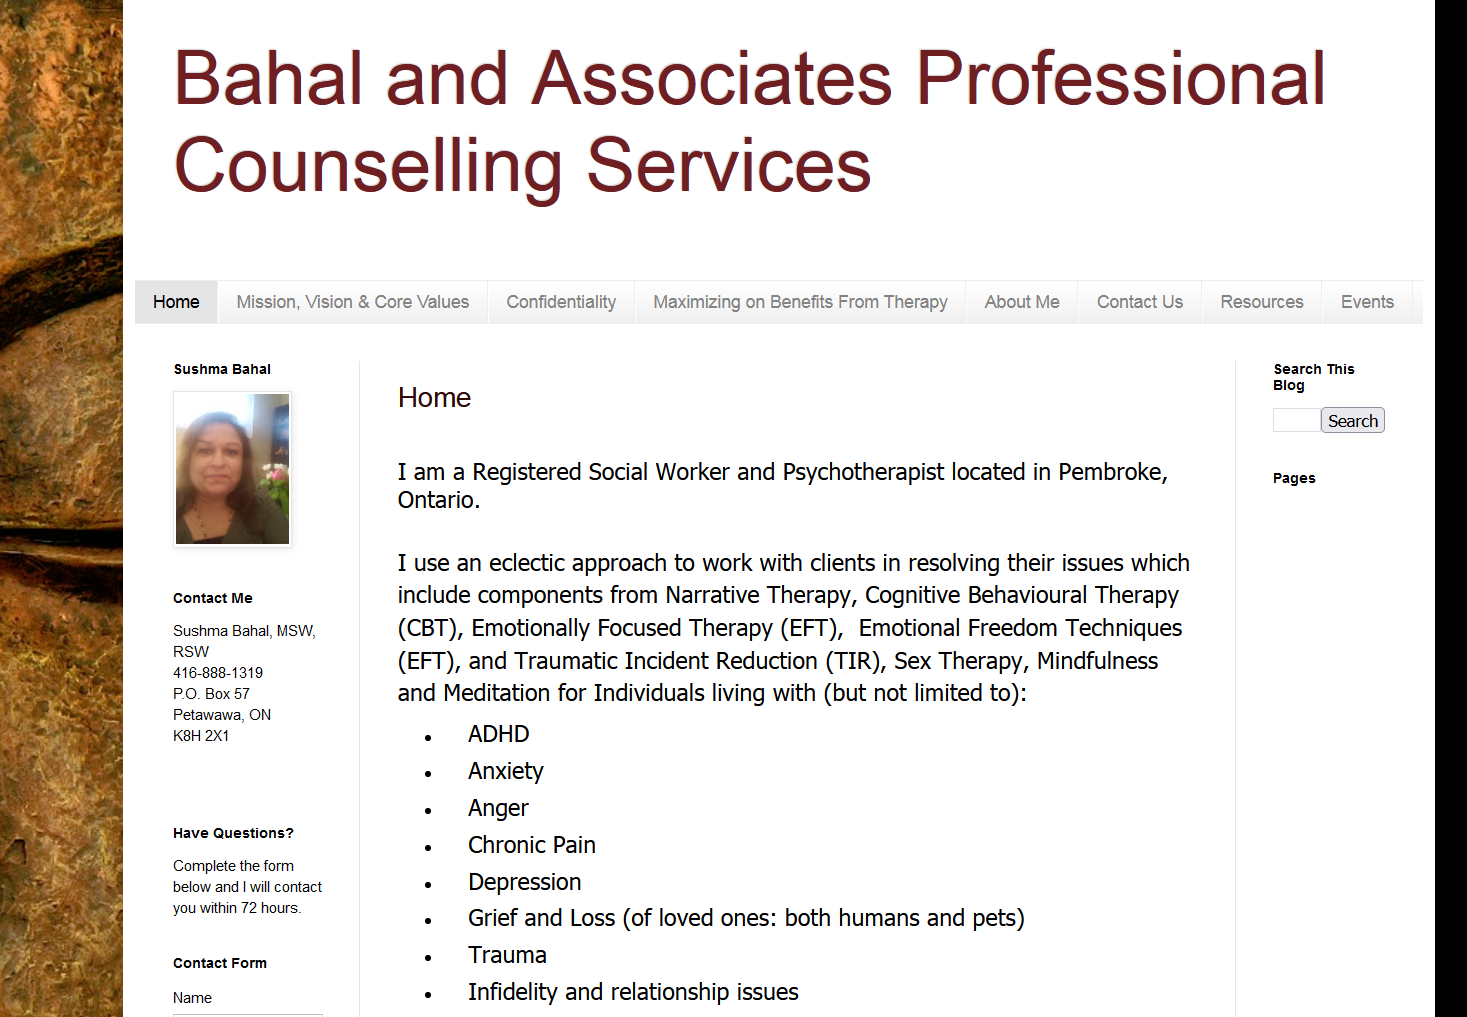 Bahal Counselling